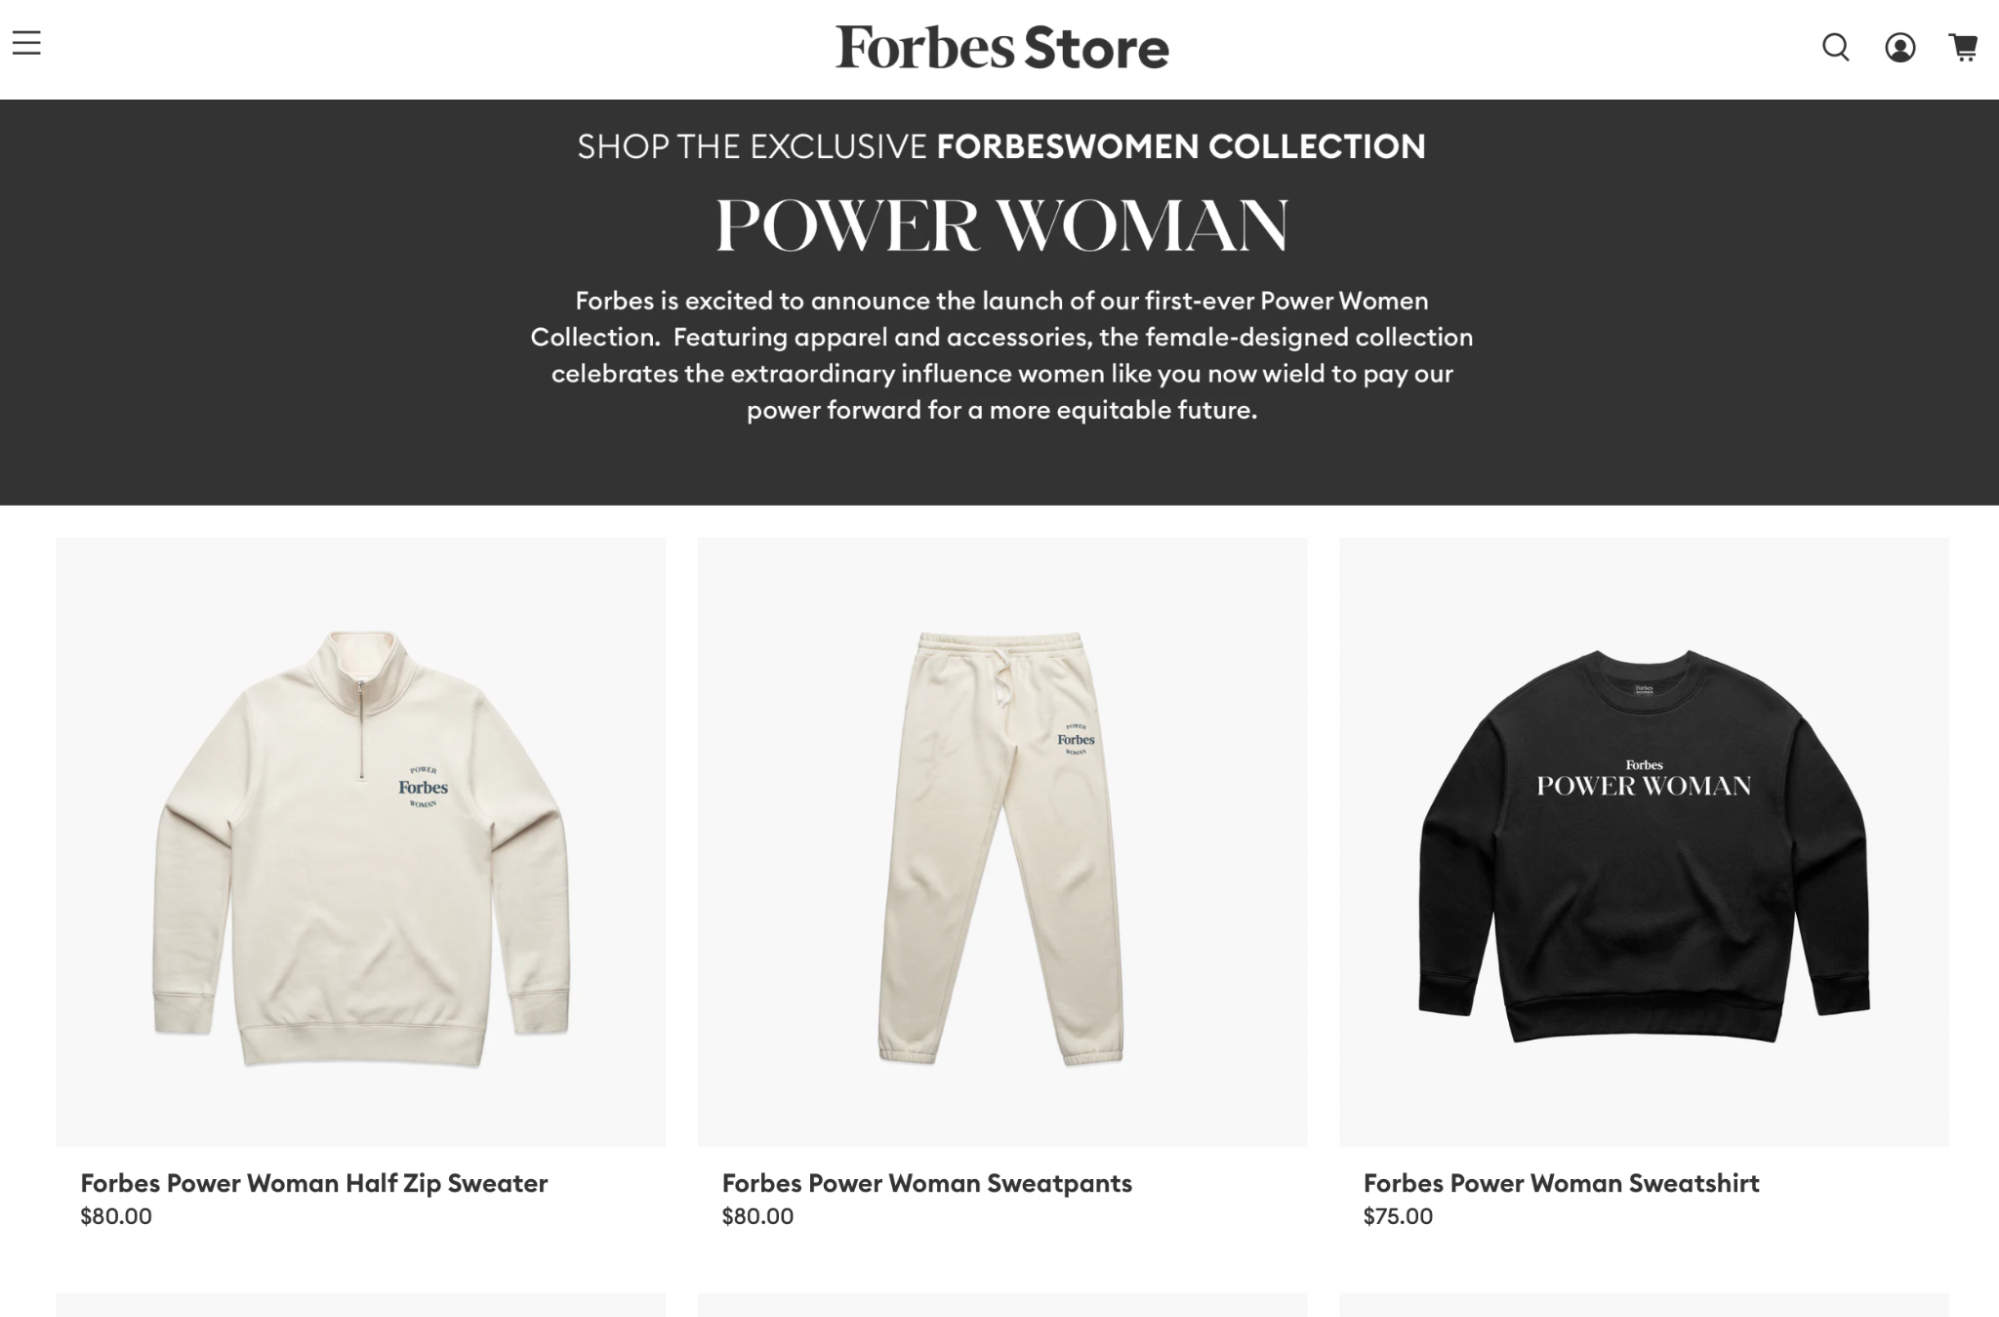 An ad for the Forbes store appears on Forbes’ website.